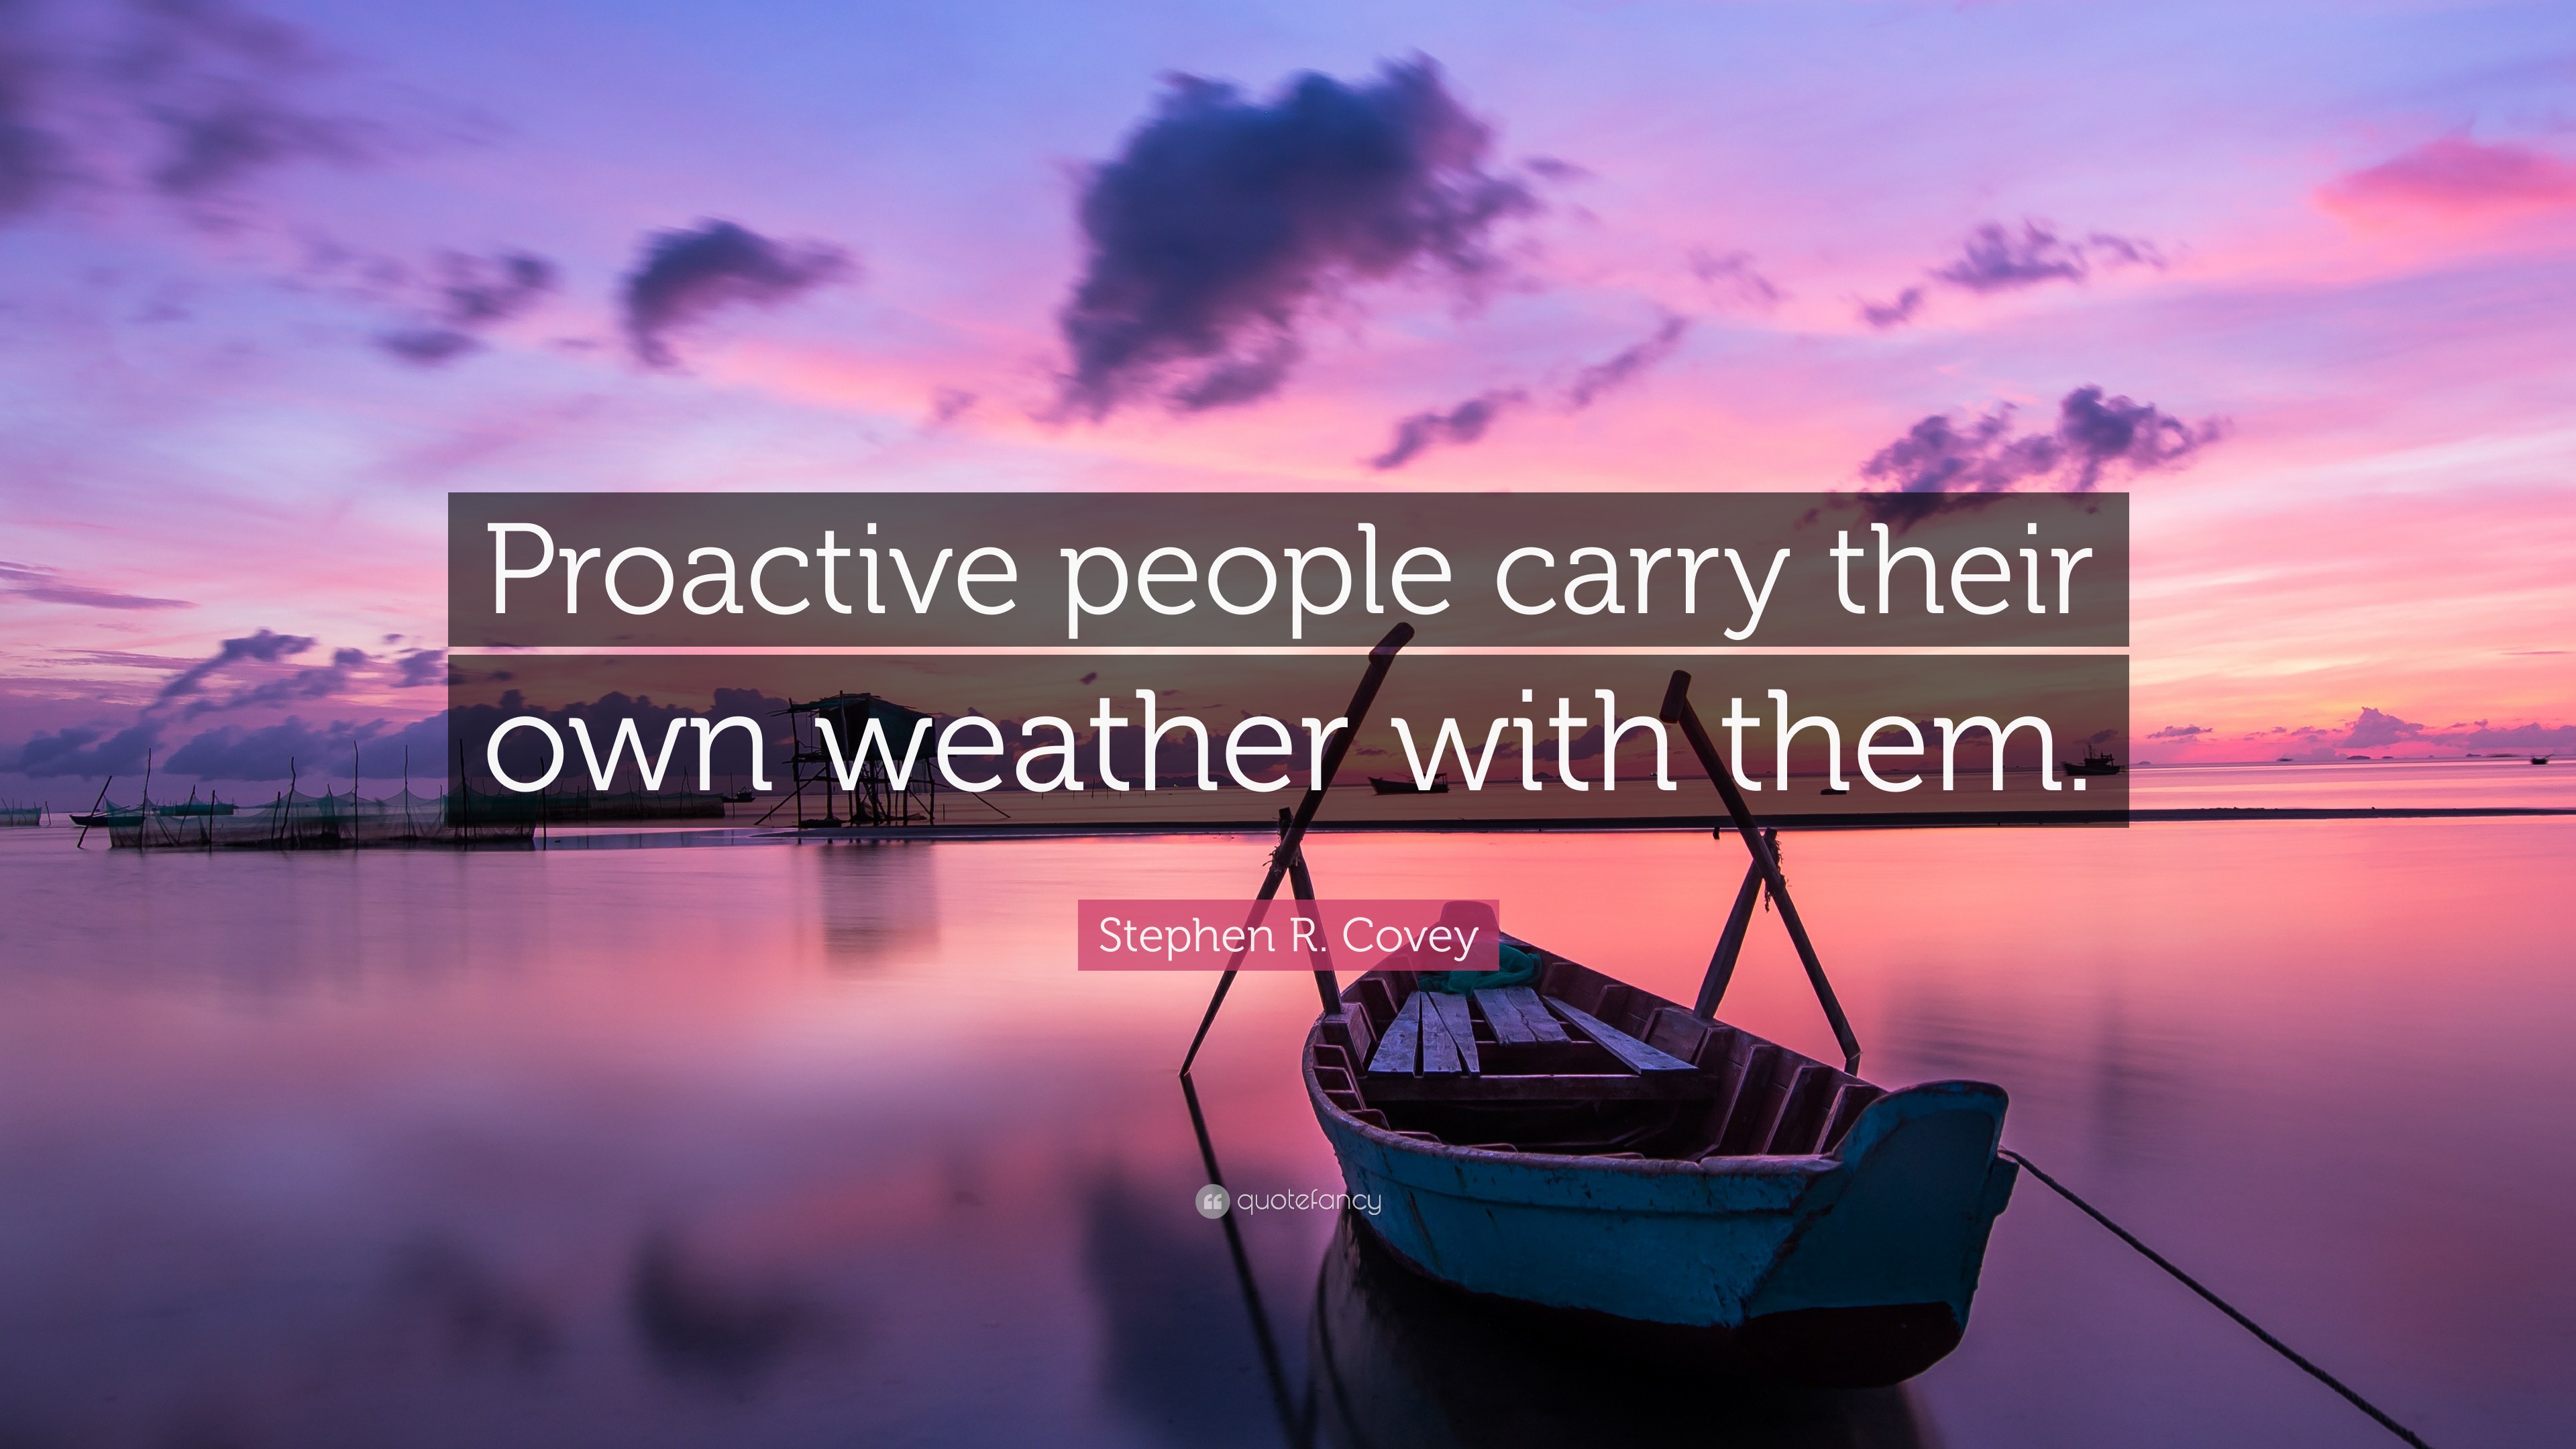 2027767 Stephen R Covey Quote Proactive people carry their own weather